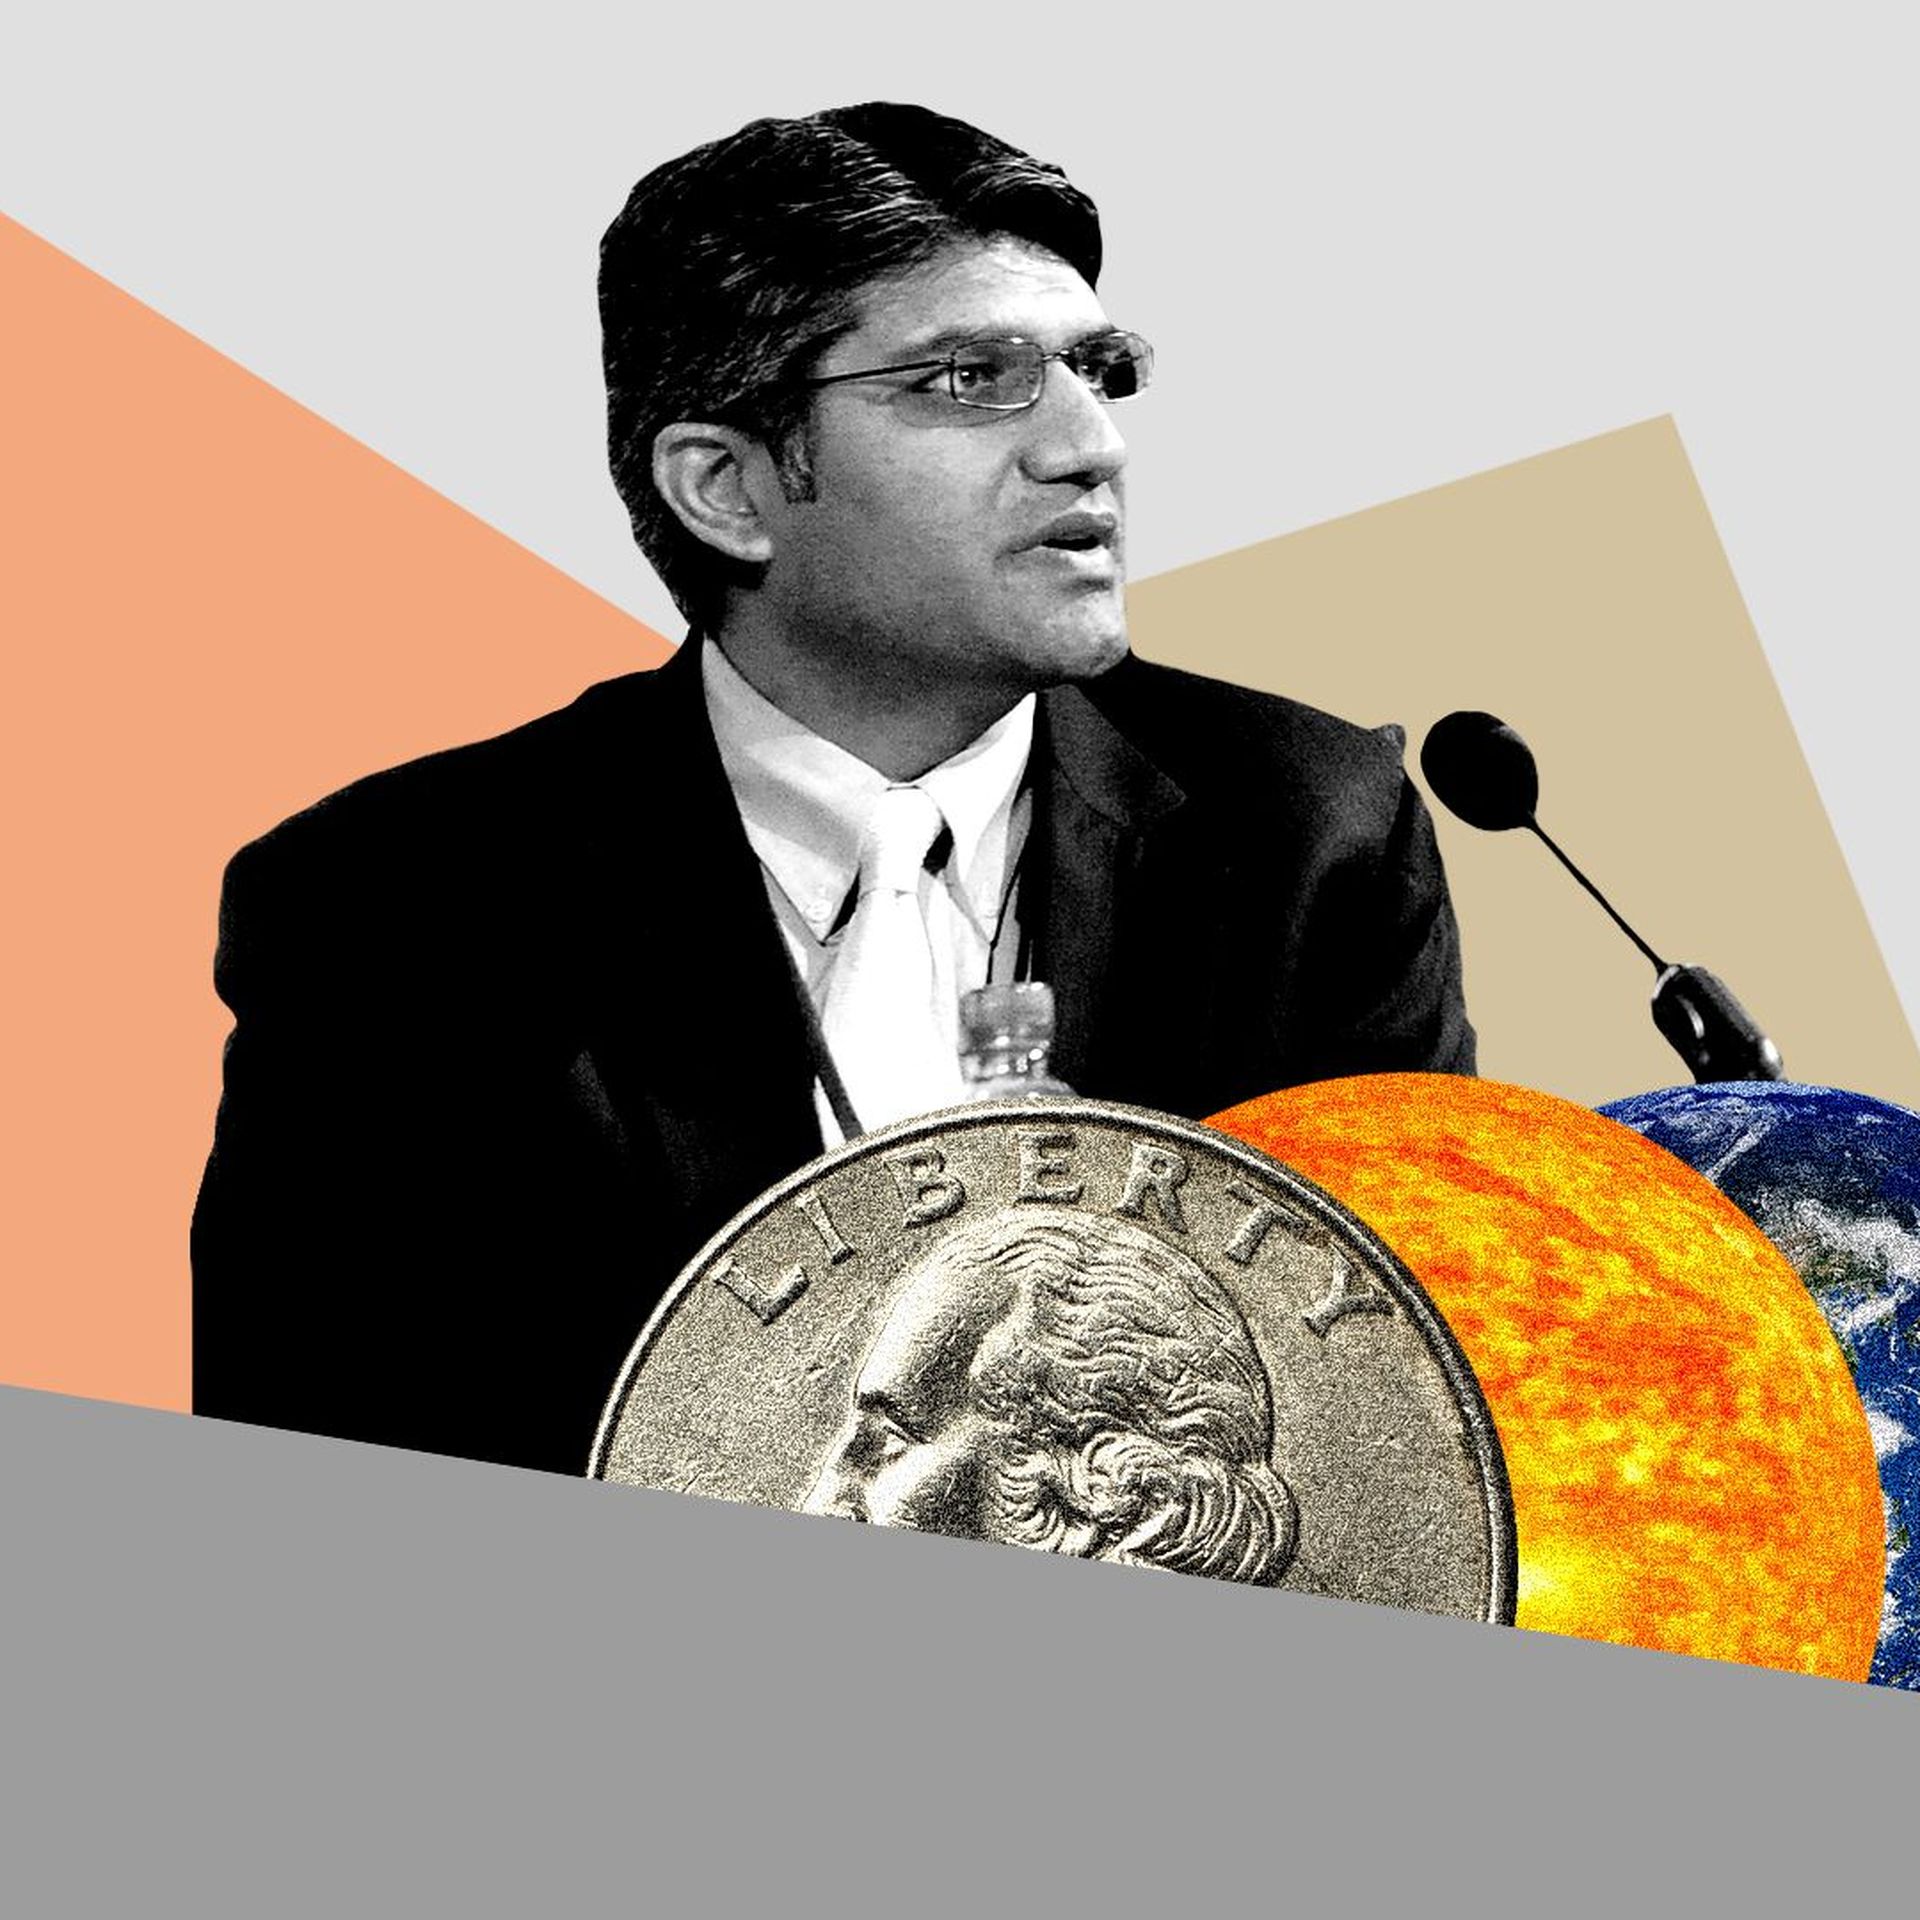 Photo illustration collage of Jigar Shah, money, an earth and sun